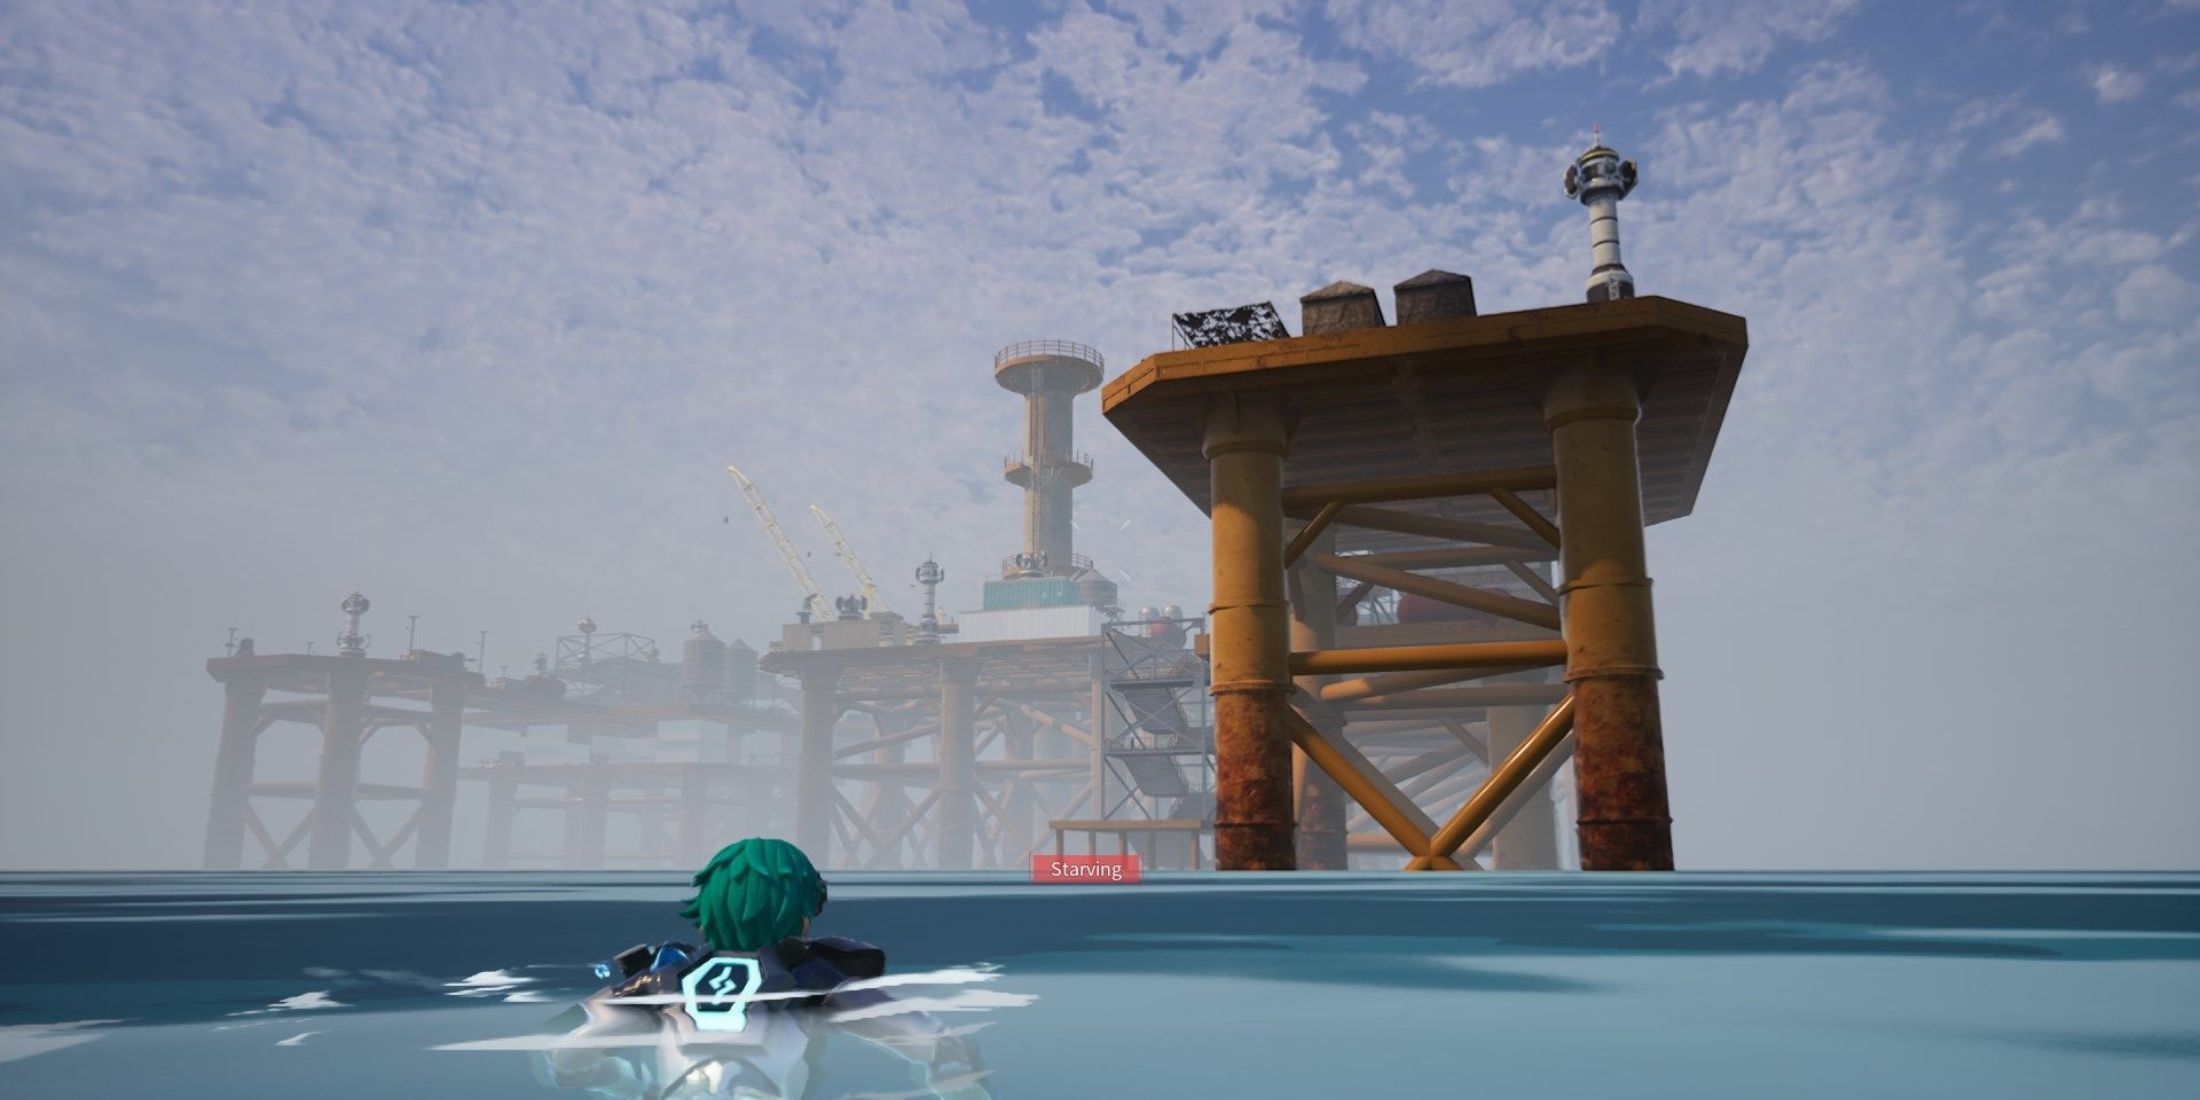 Palworld Character and oil rig